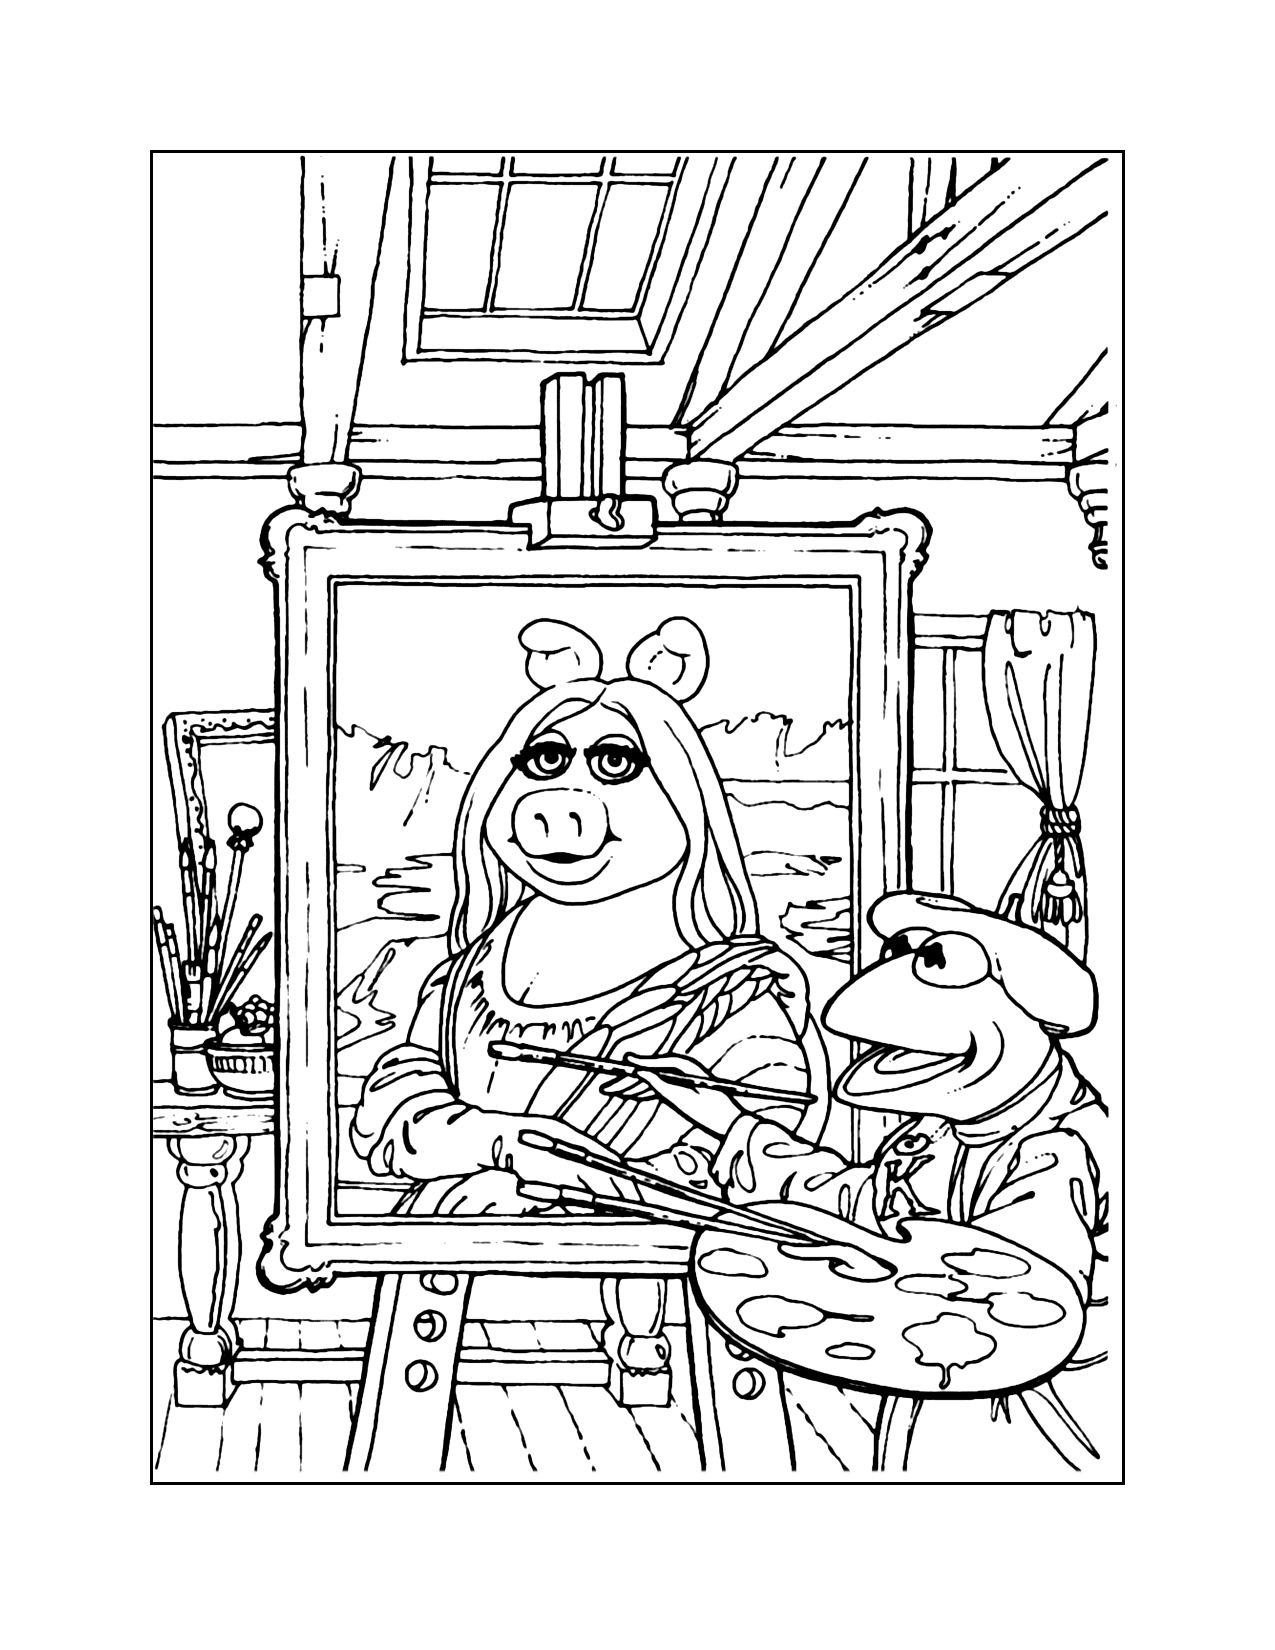 Kermit Painting The Mona Piggy Coloring Page